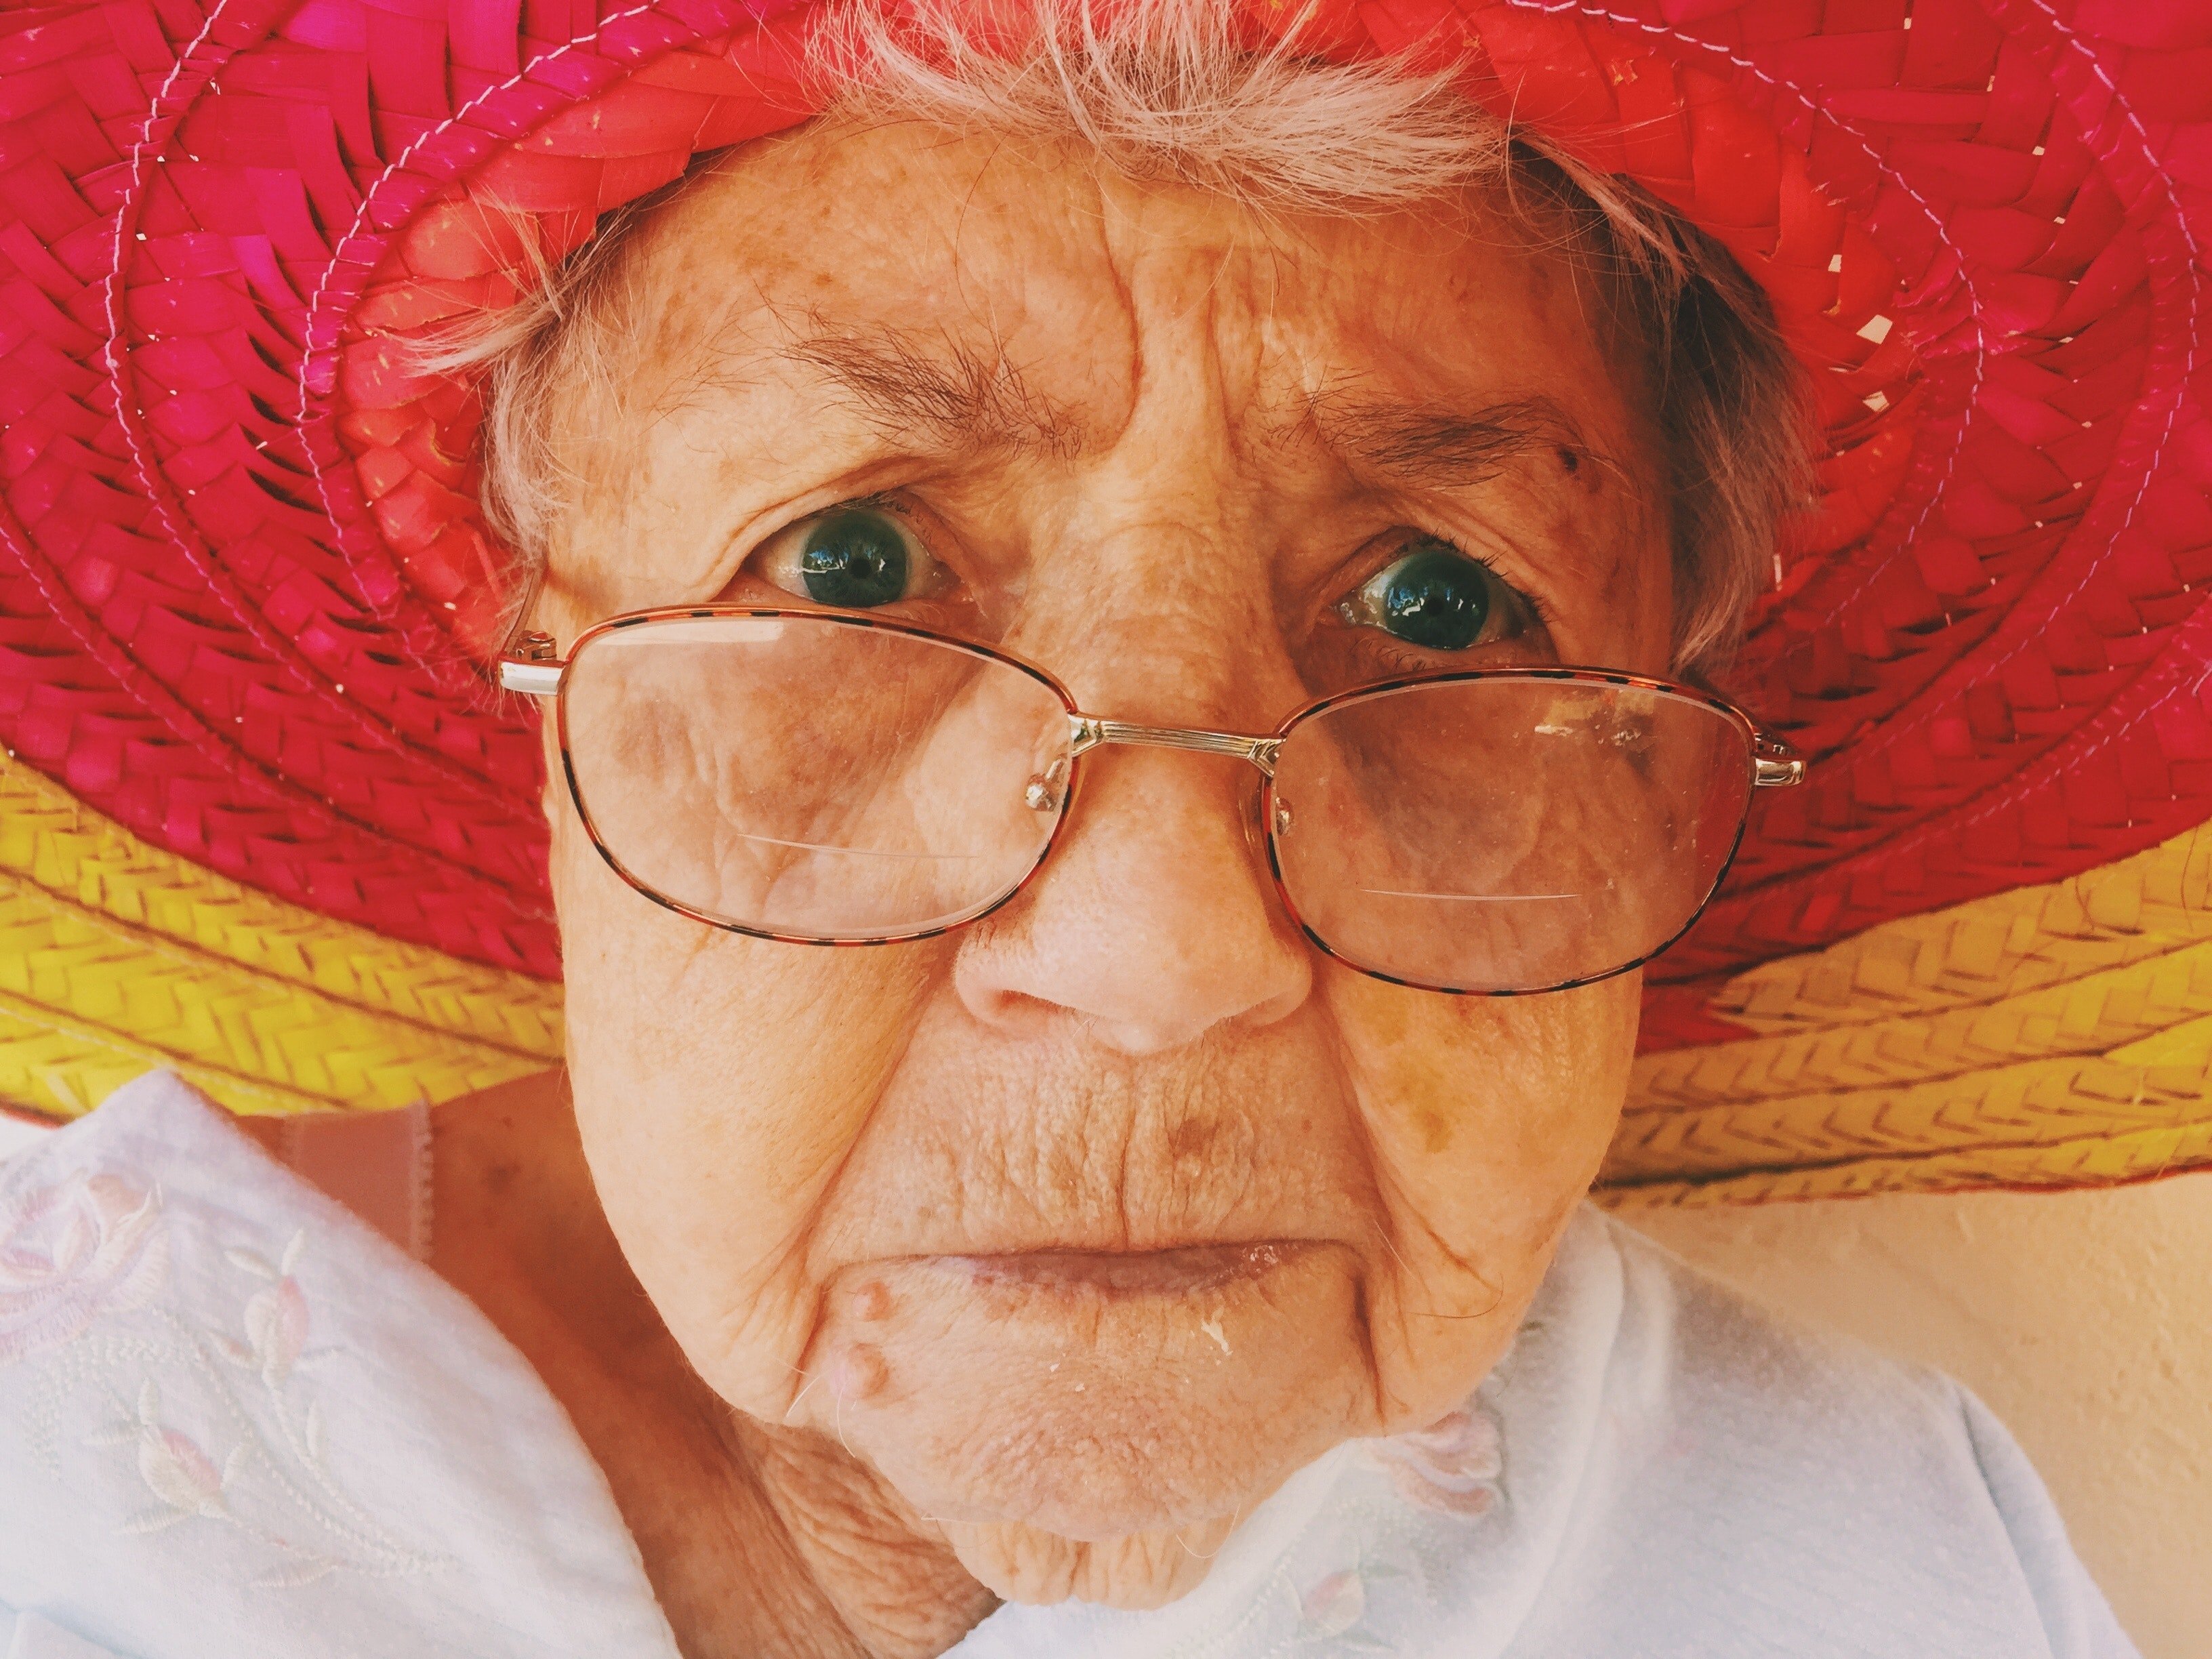 An angry grandma in a giant red hat. | Photo: Pexels